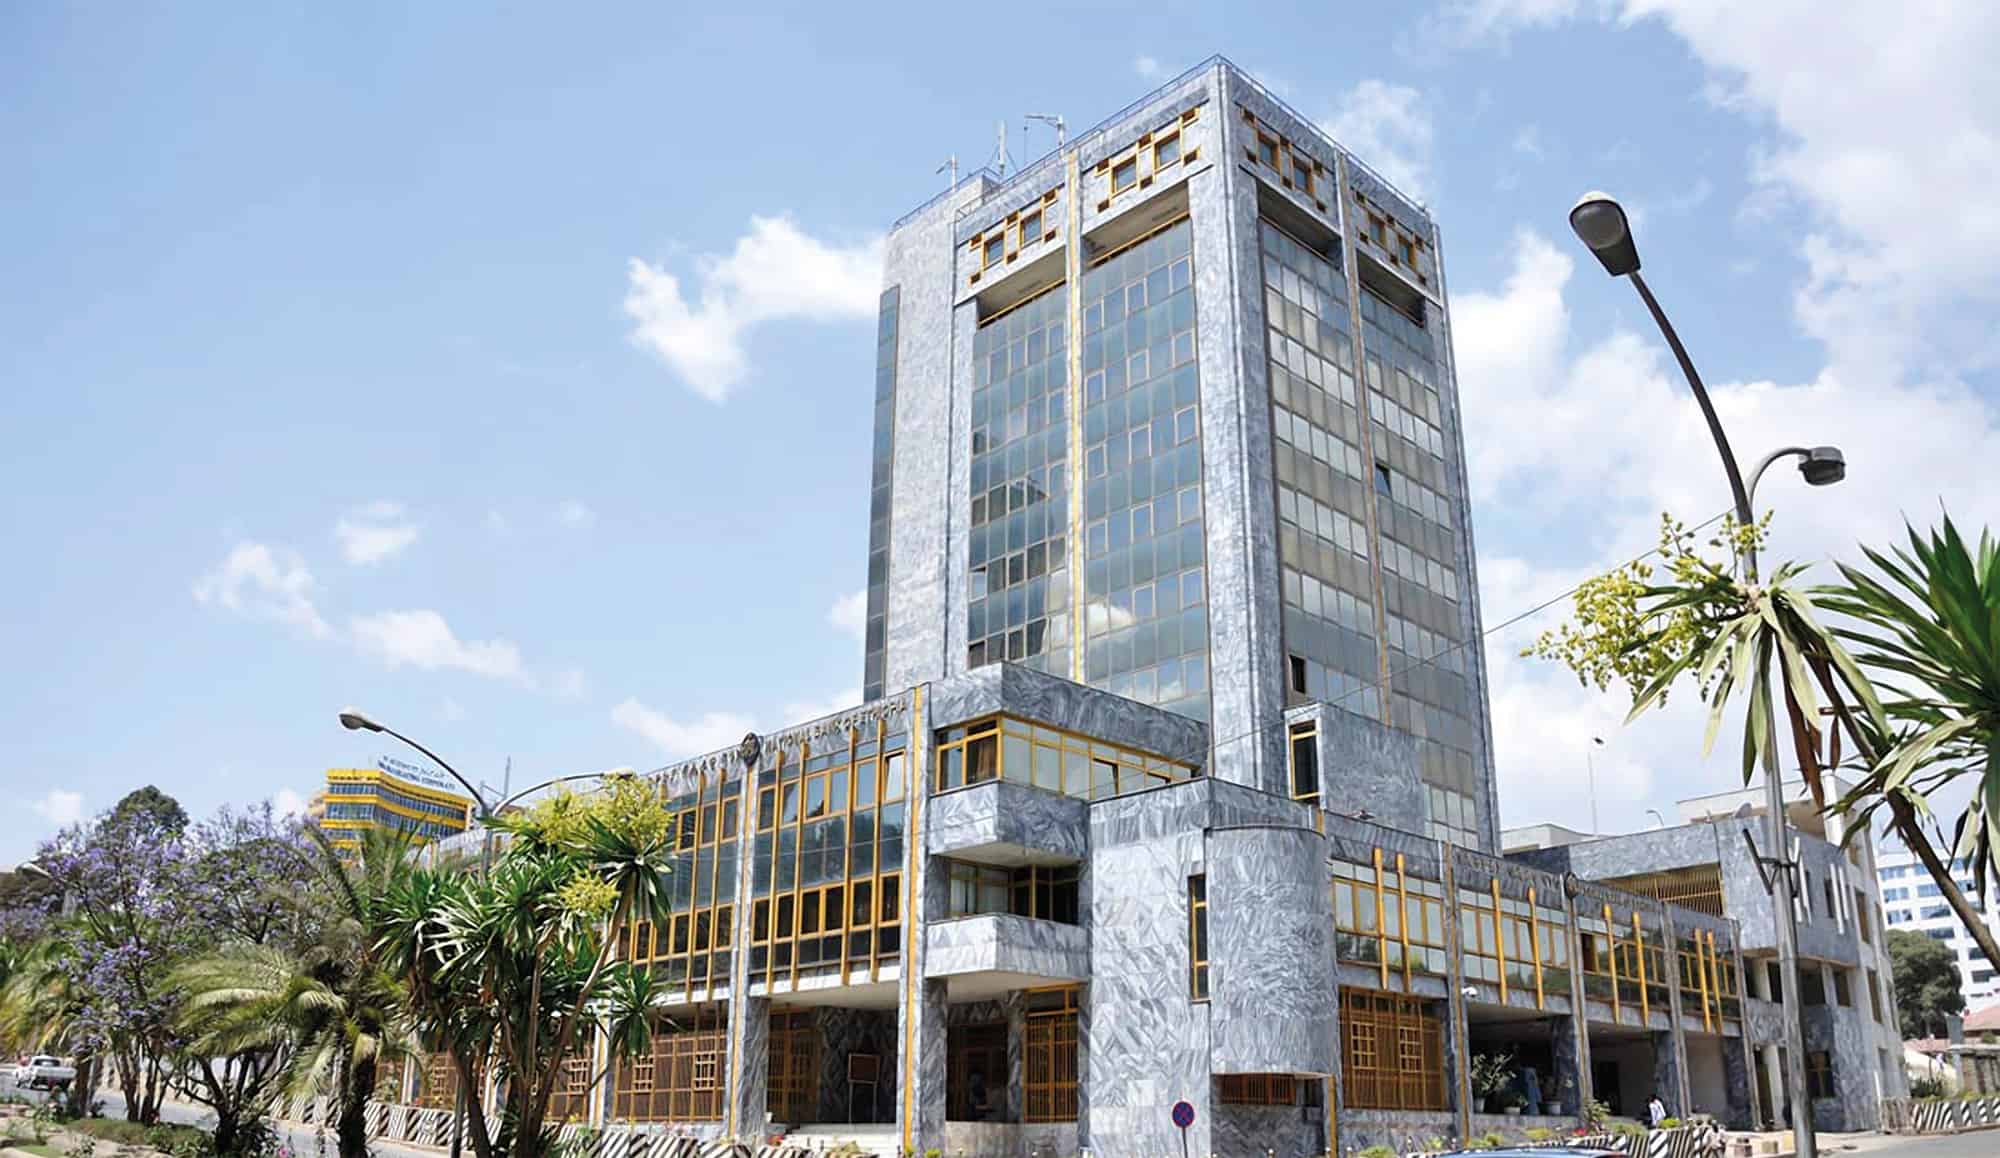 Central bank of Ethiopia